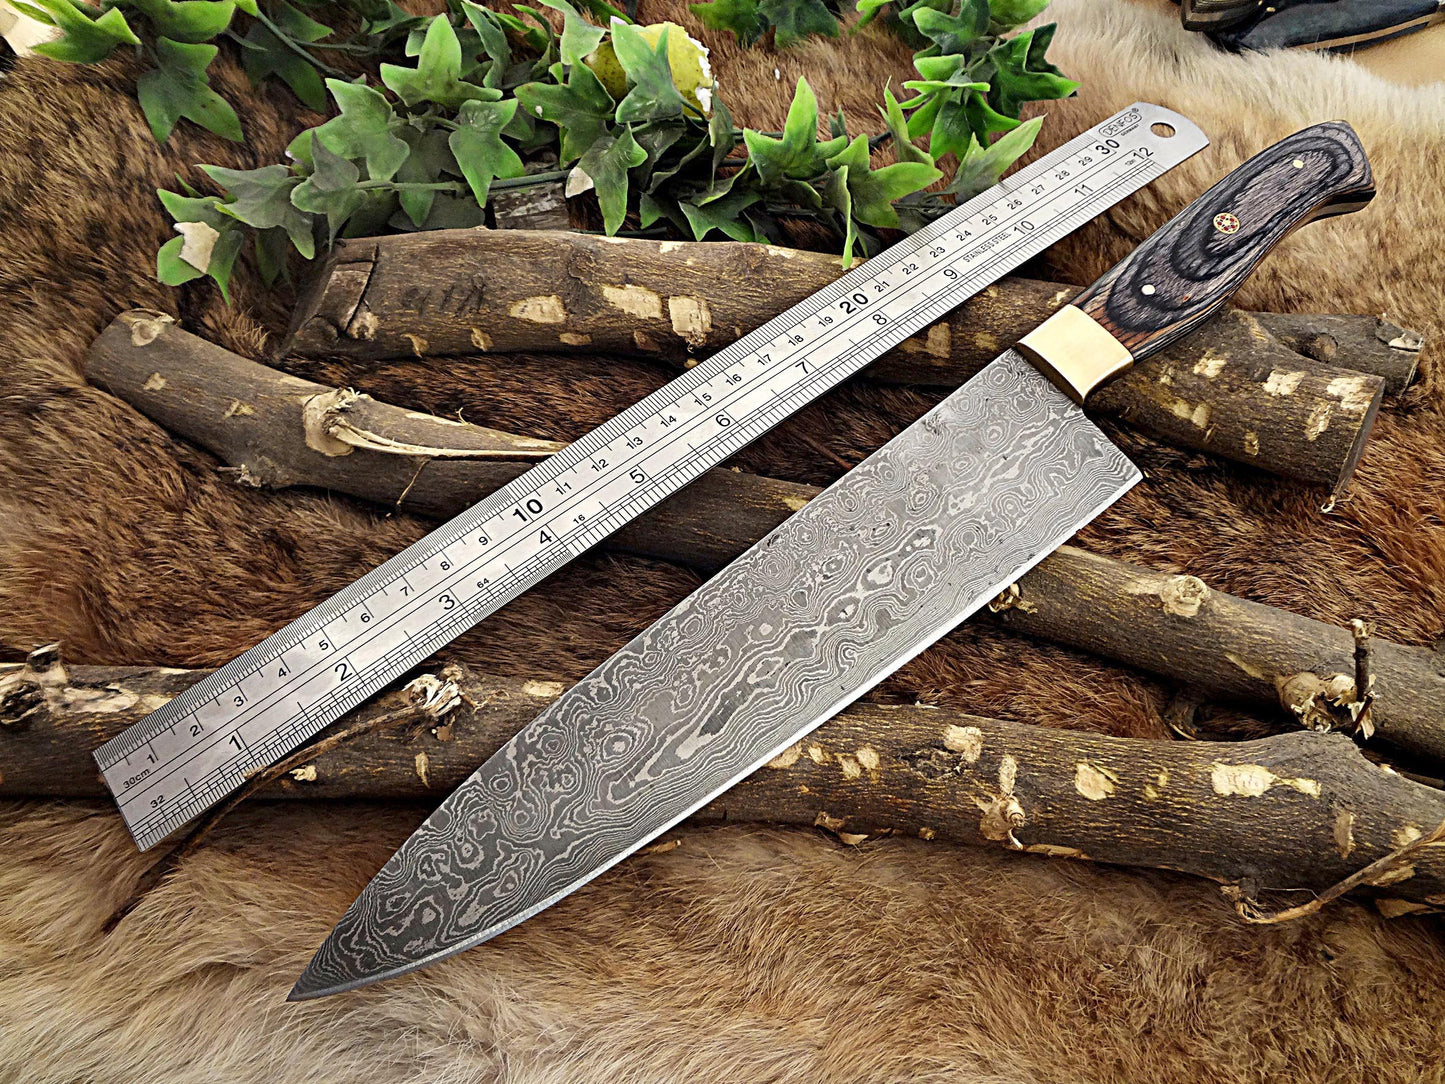 Damascus Steel kitchen Knife 14 Inches full tang 9" long Hand Forged blade, 2 Tone Dollar wood and brass bolster scale